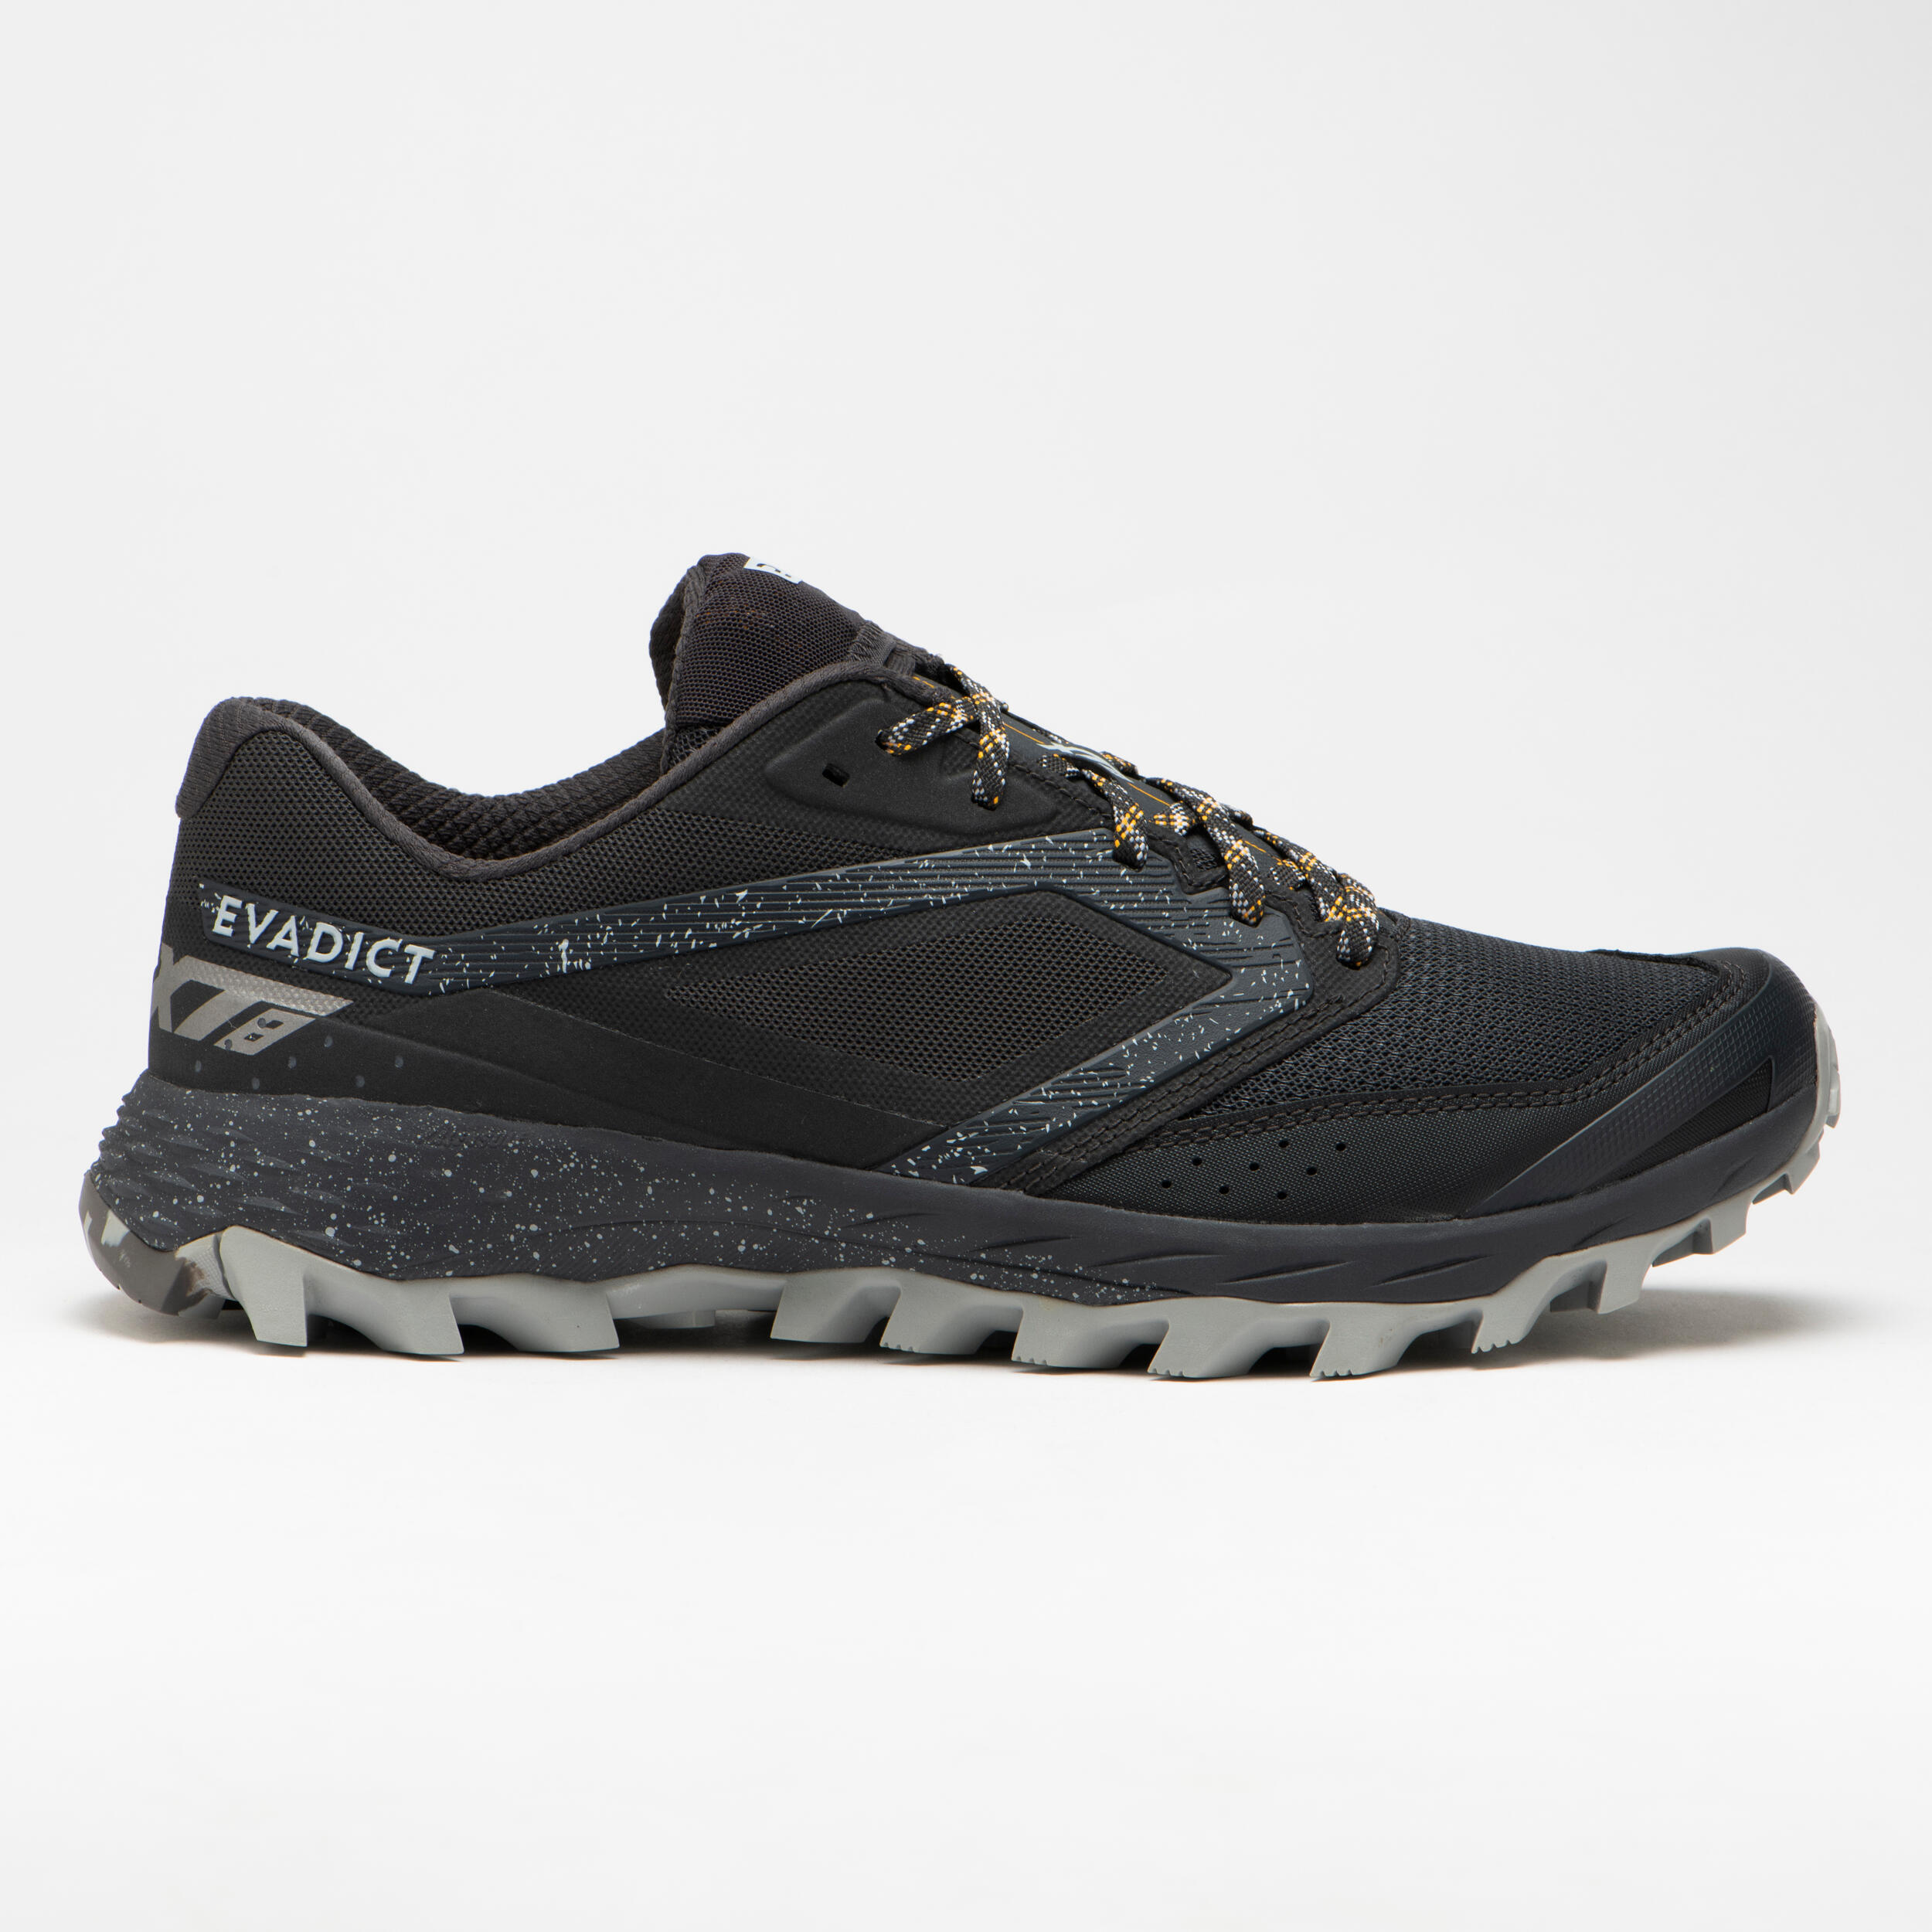 XT8 men's trail running shoes black and grey 3/12